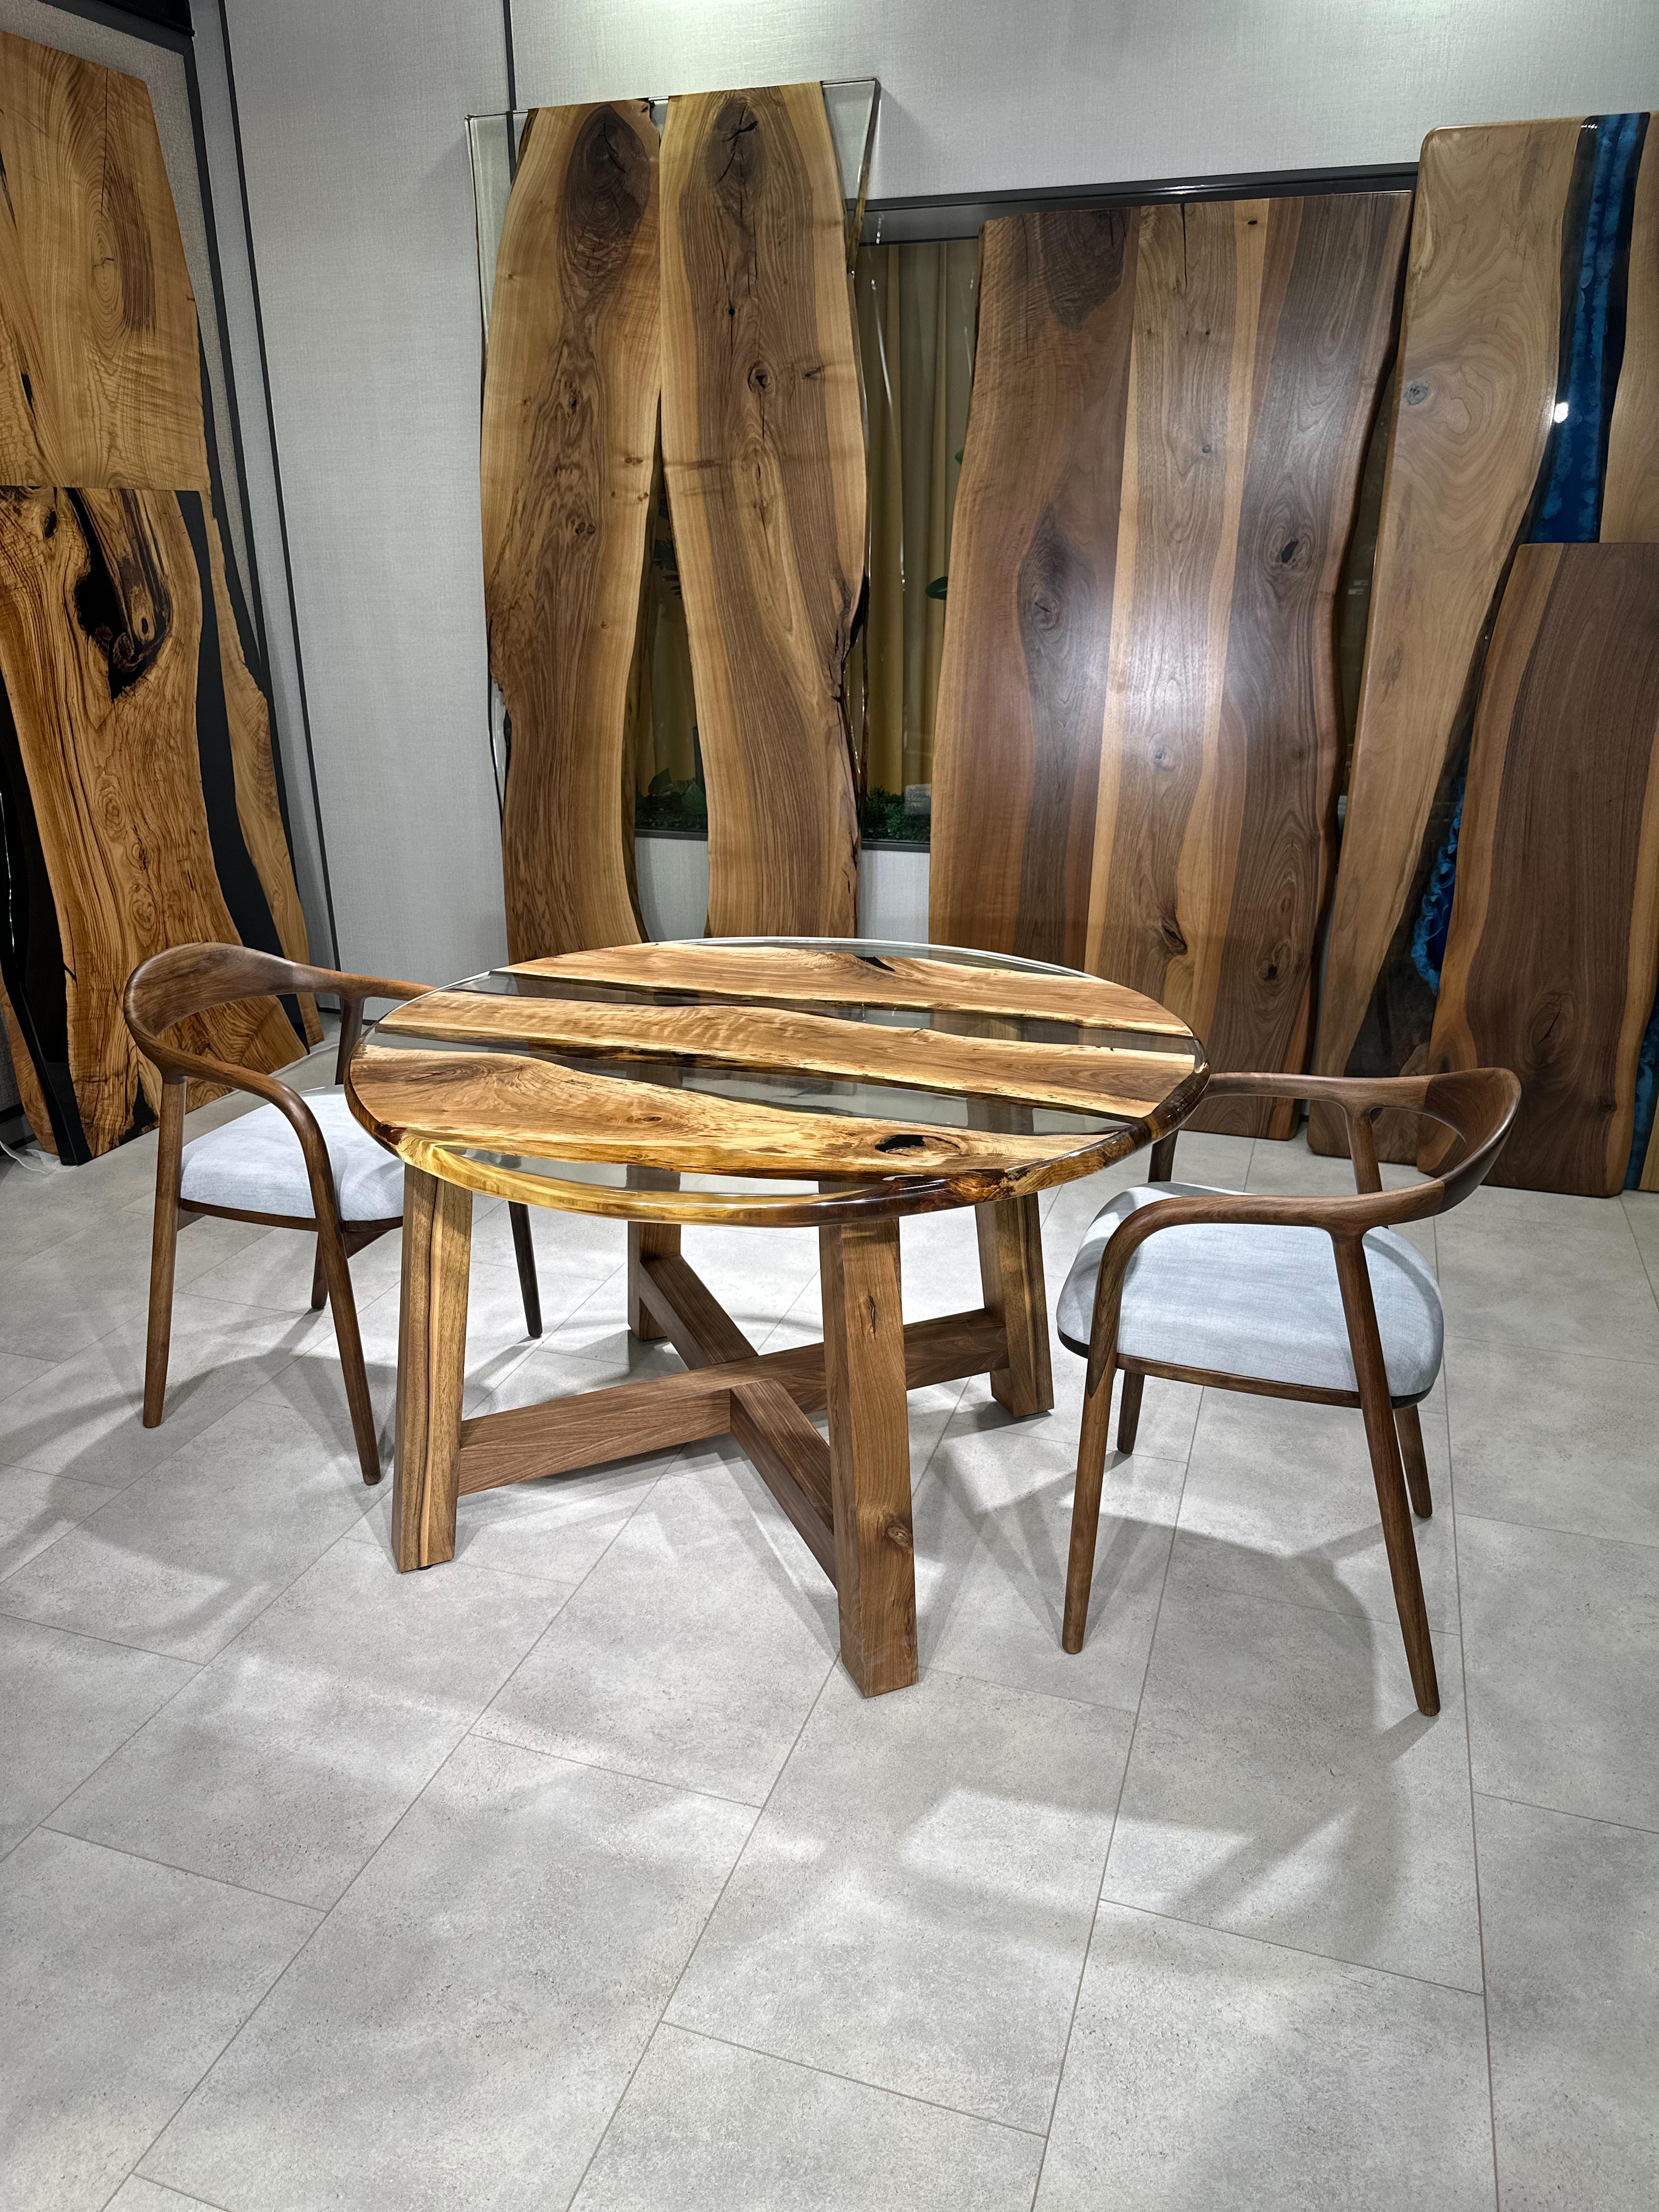 Walnut Custom Clear Epoxy Resin Round Dining Table 

This table is made of 500 years old walnut wood. The grains and texture of the wood describe what a natural walnut woods looks like.
It can be used as a dining table or as a conference table.